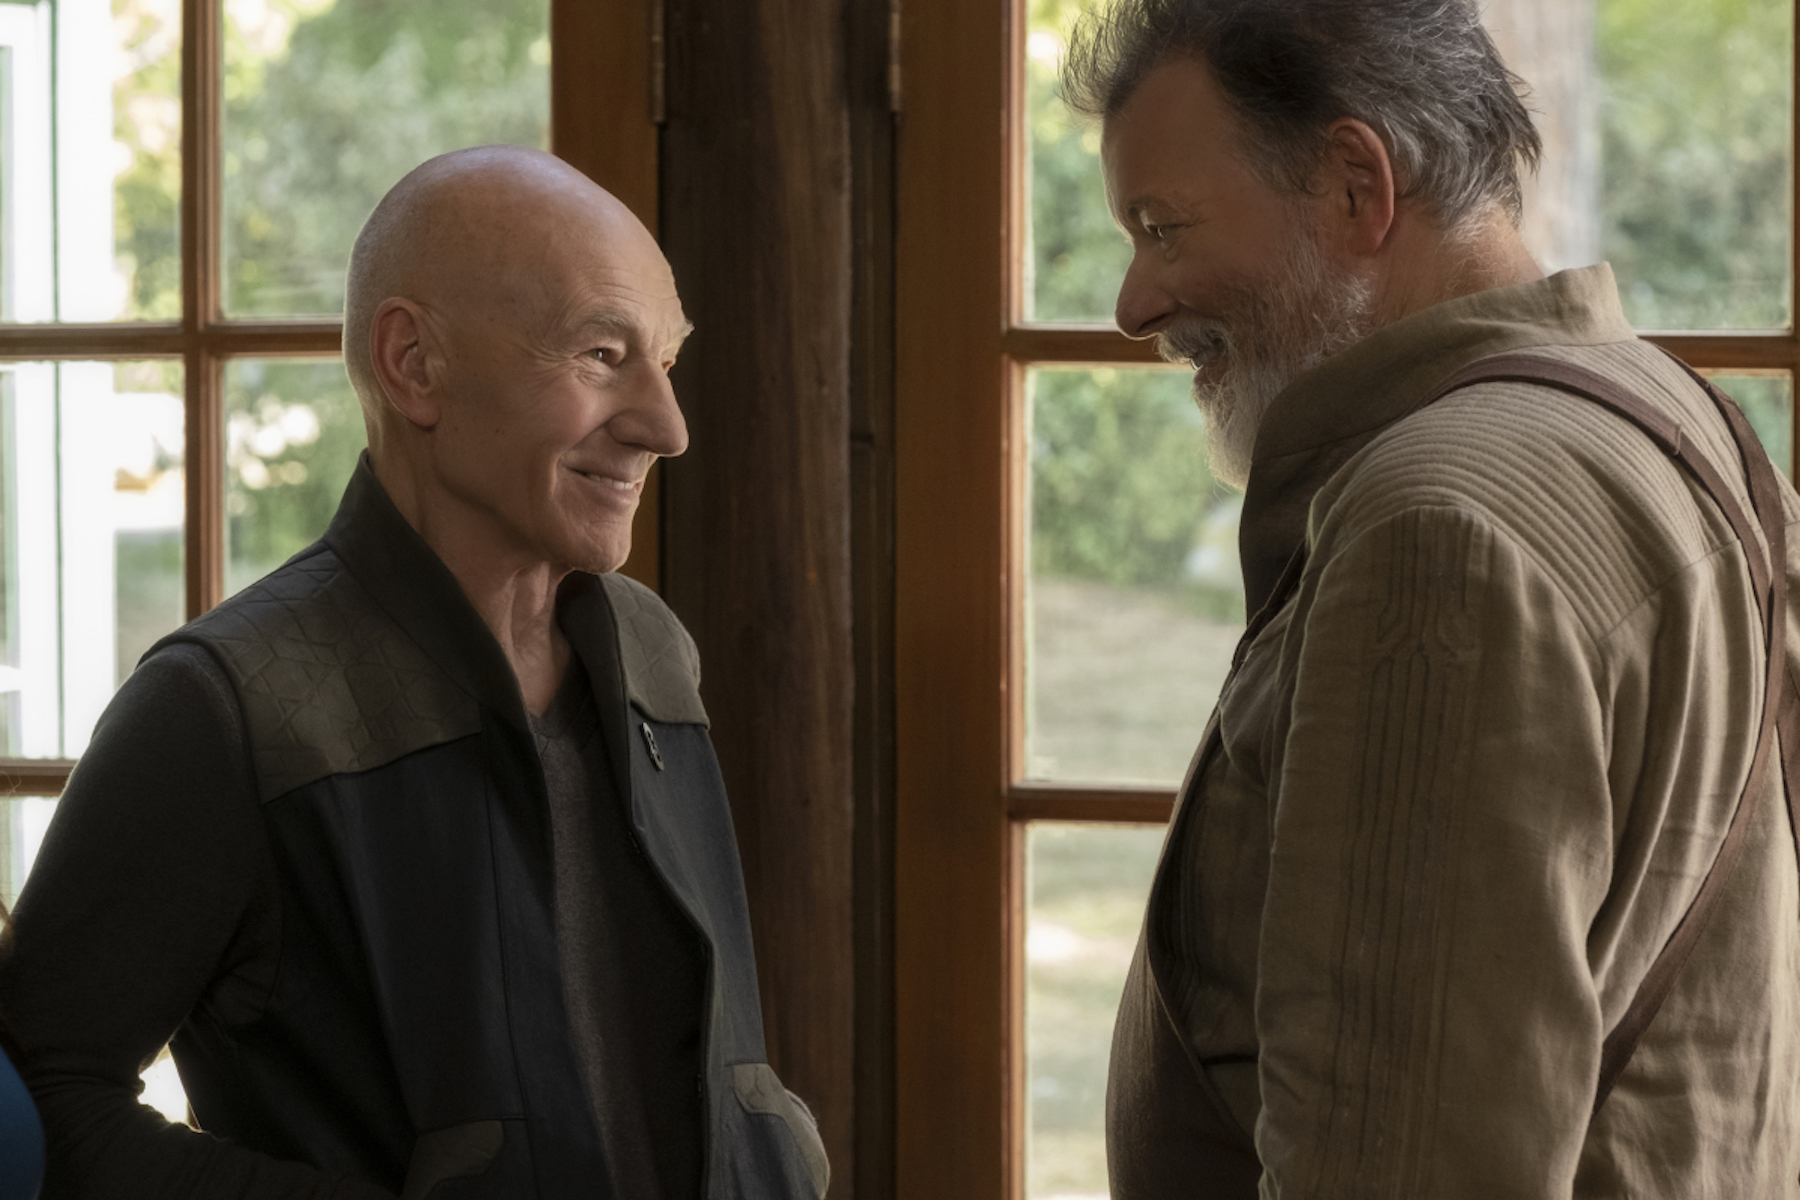 Patrick Stewart as Jean-Luc Picard and Jonathan Frakes as William Riker